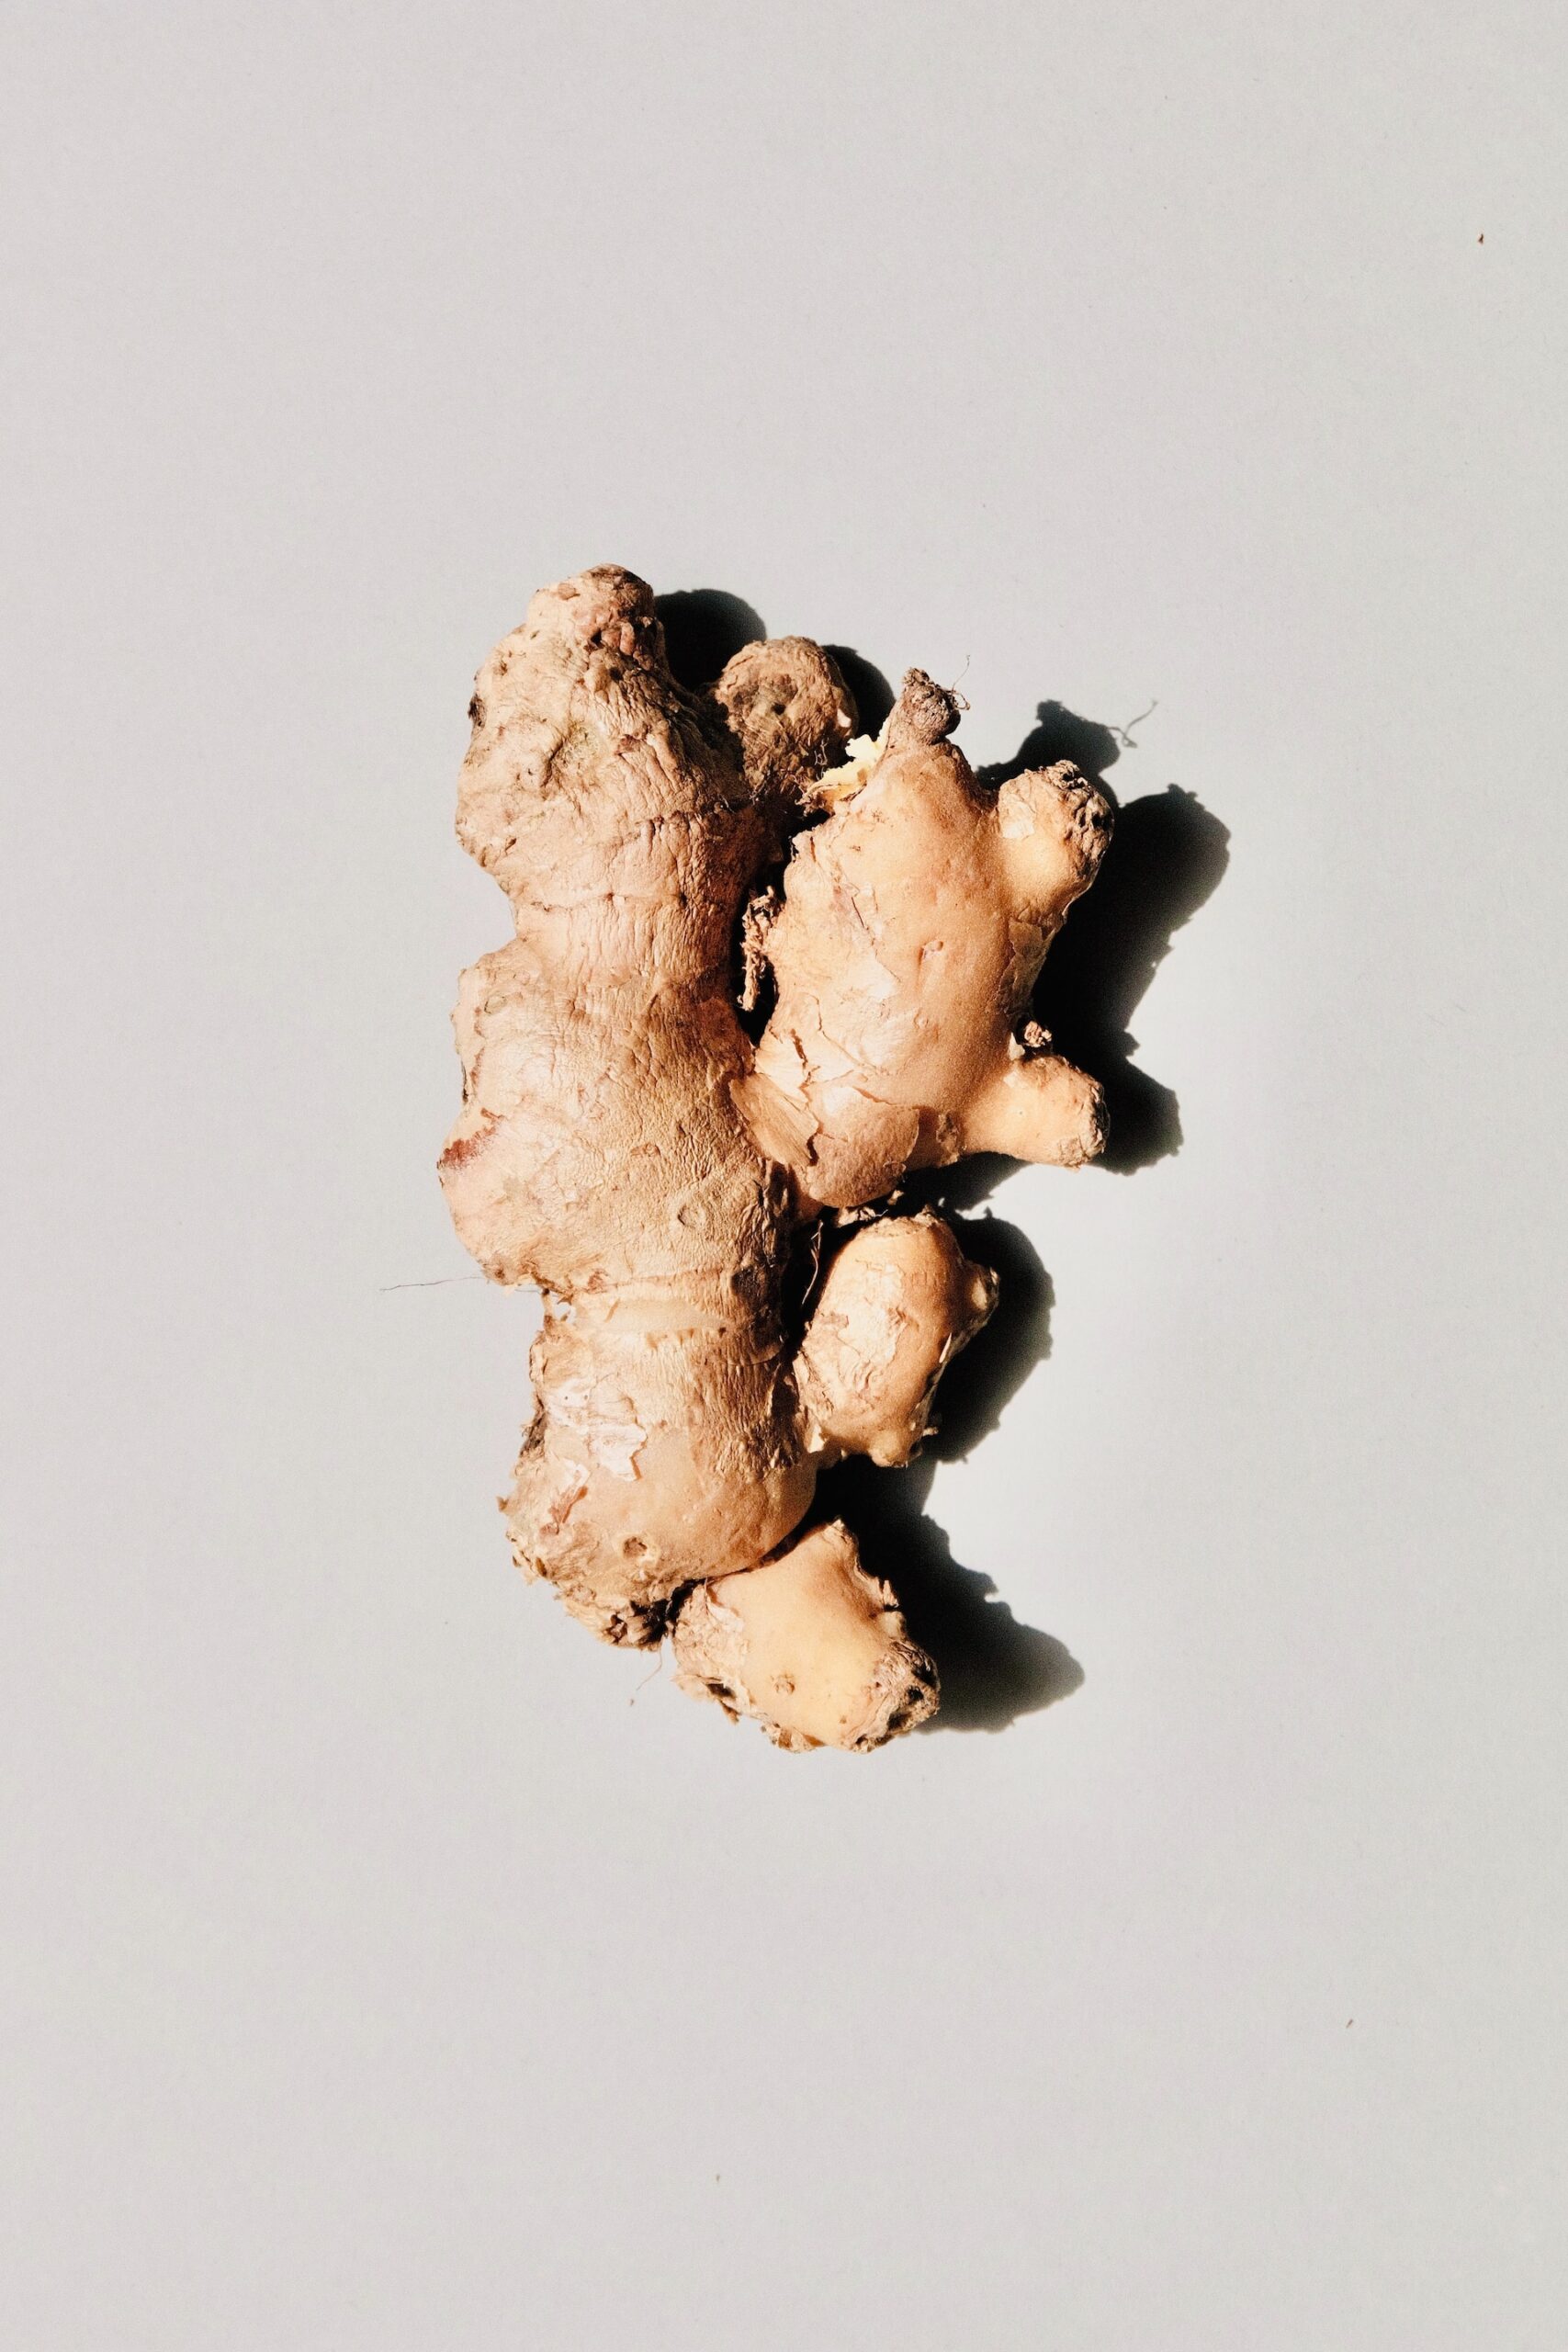 Piece of ginger root